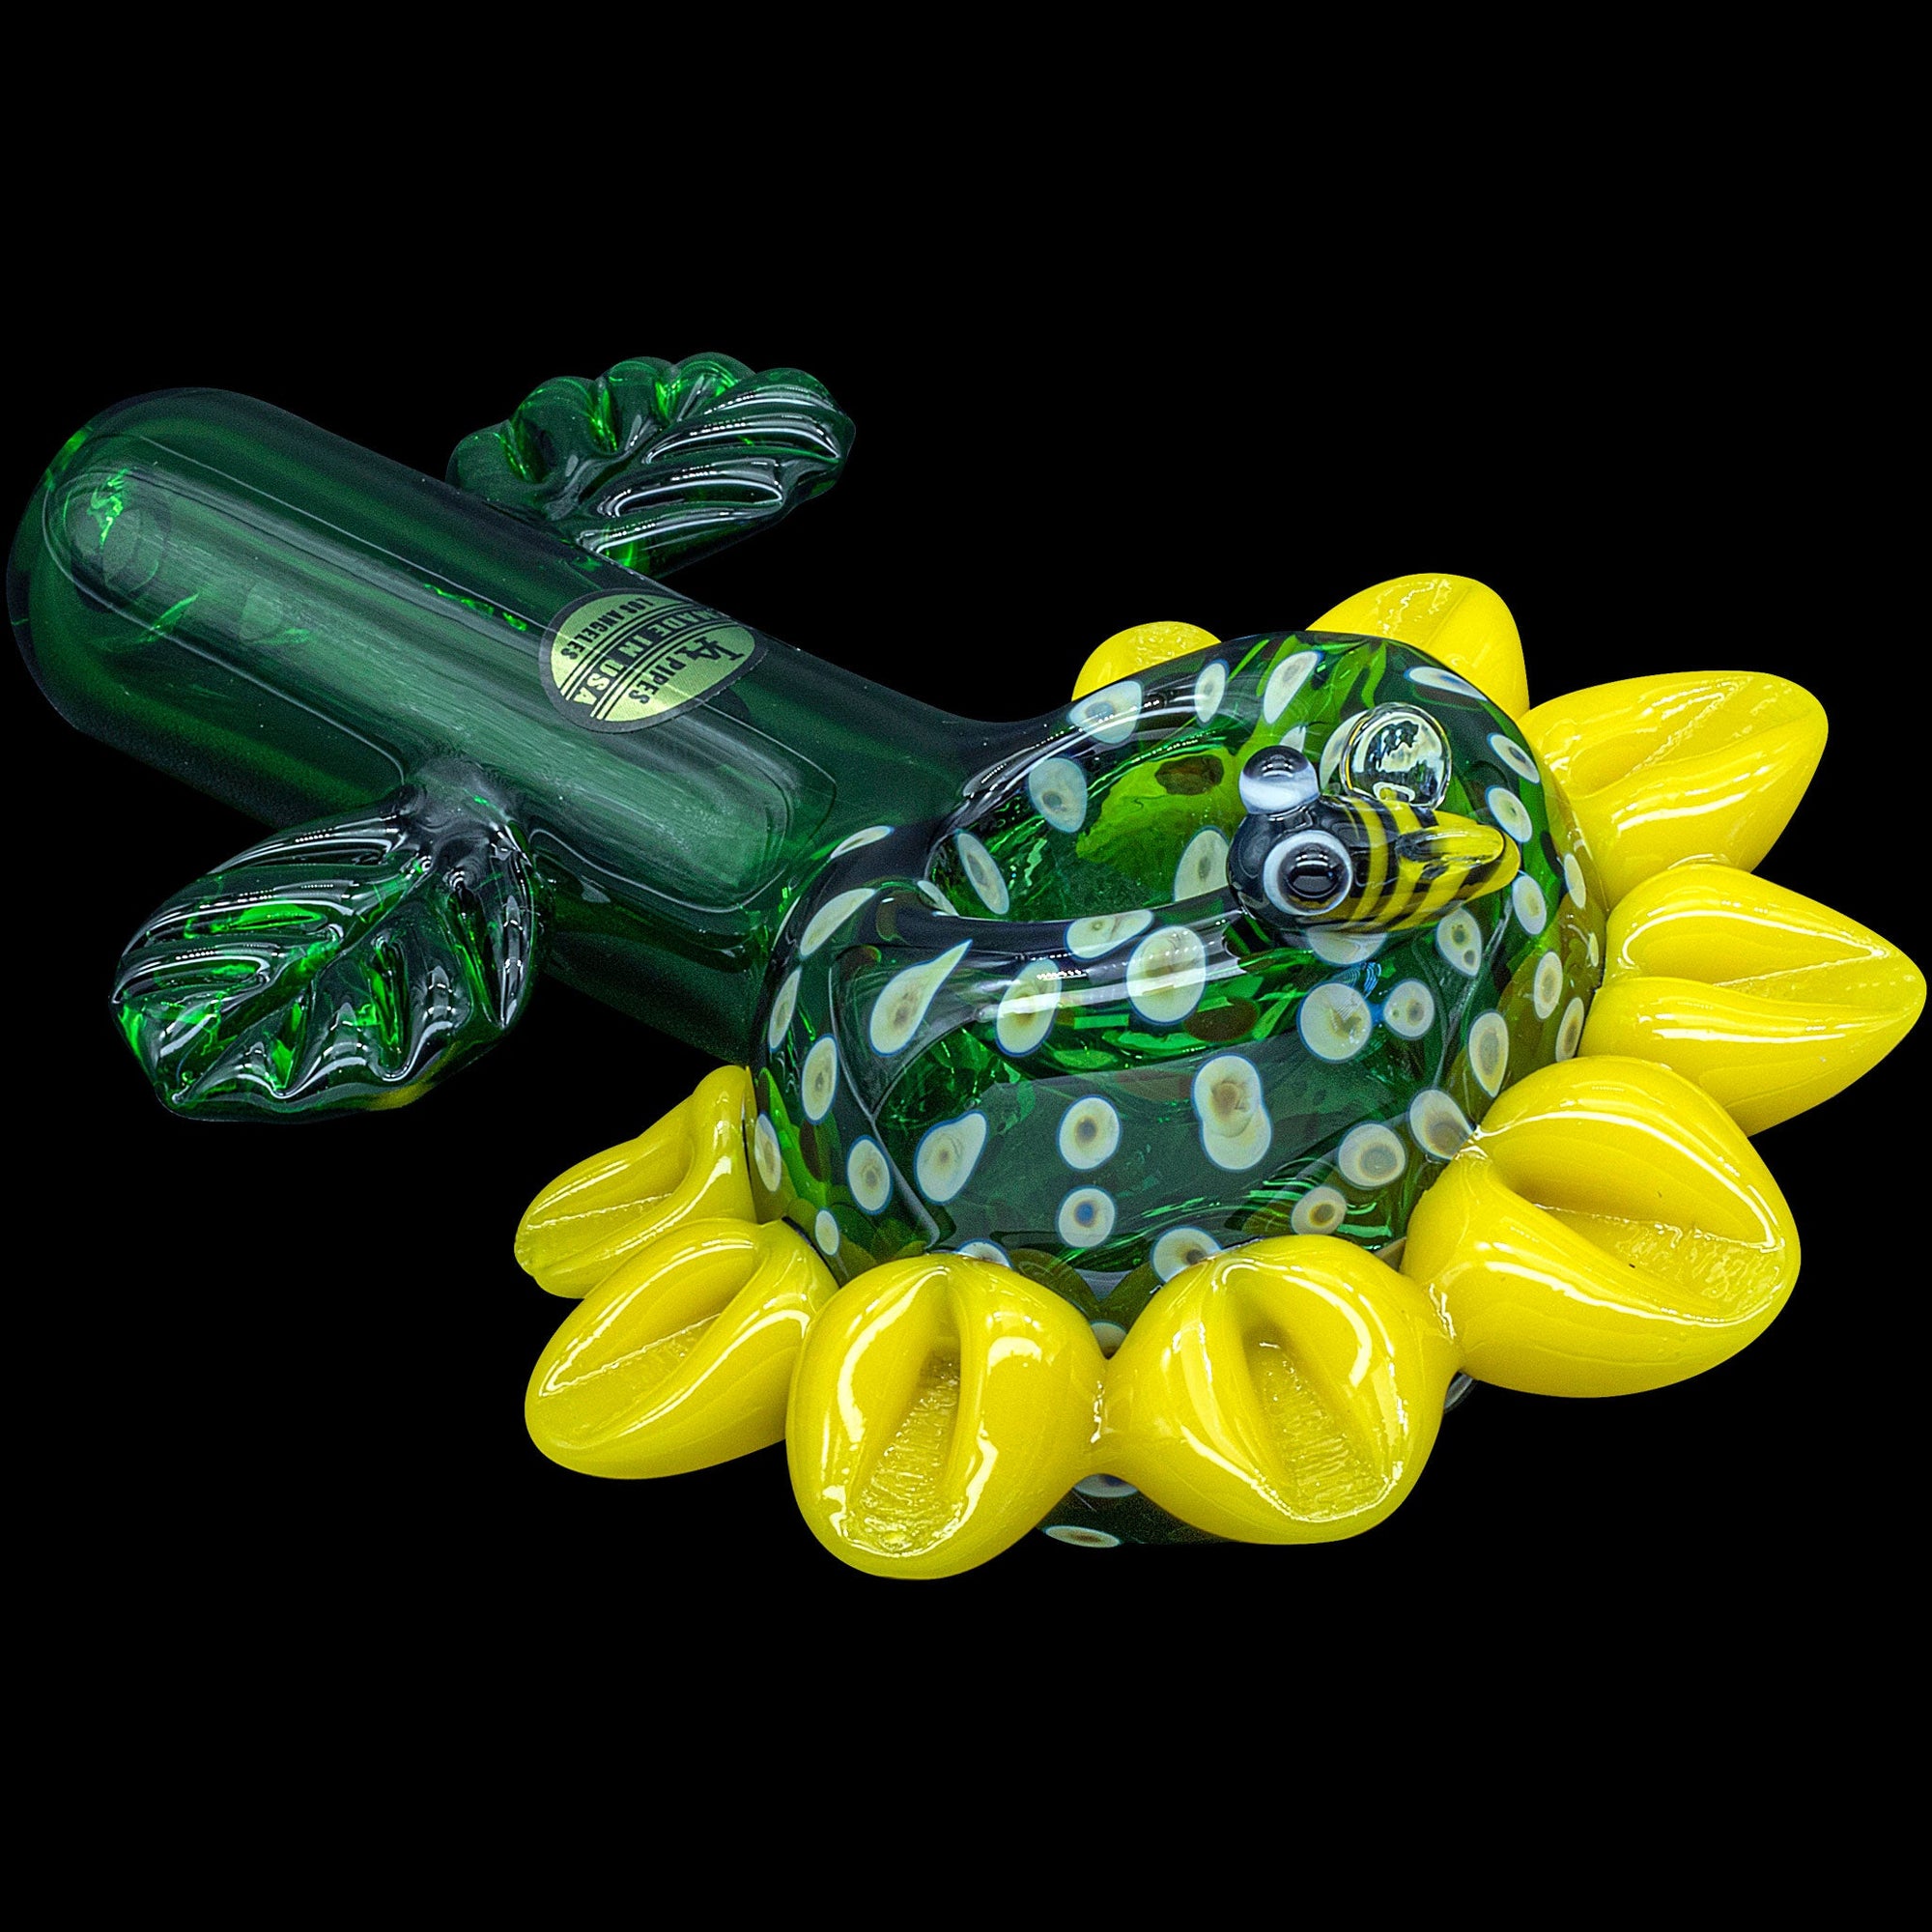 LA Pipes "Sunny Sunflowers" Glass Pipe